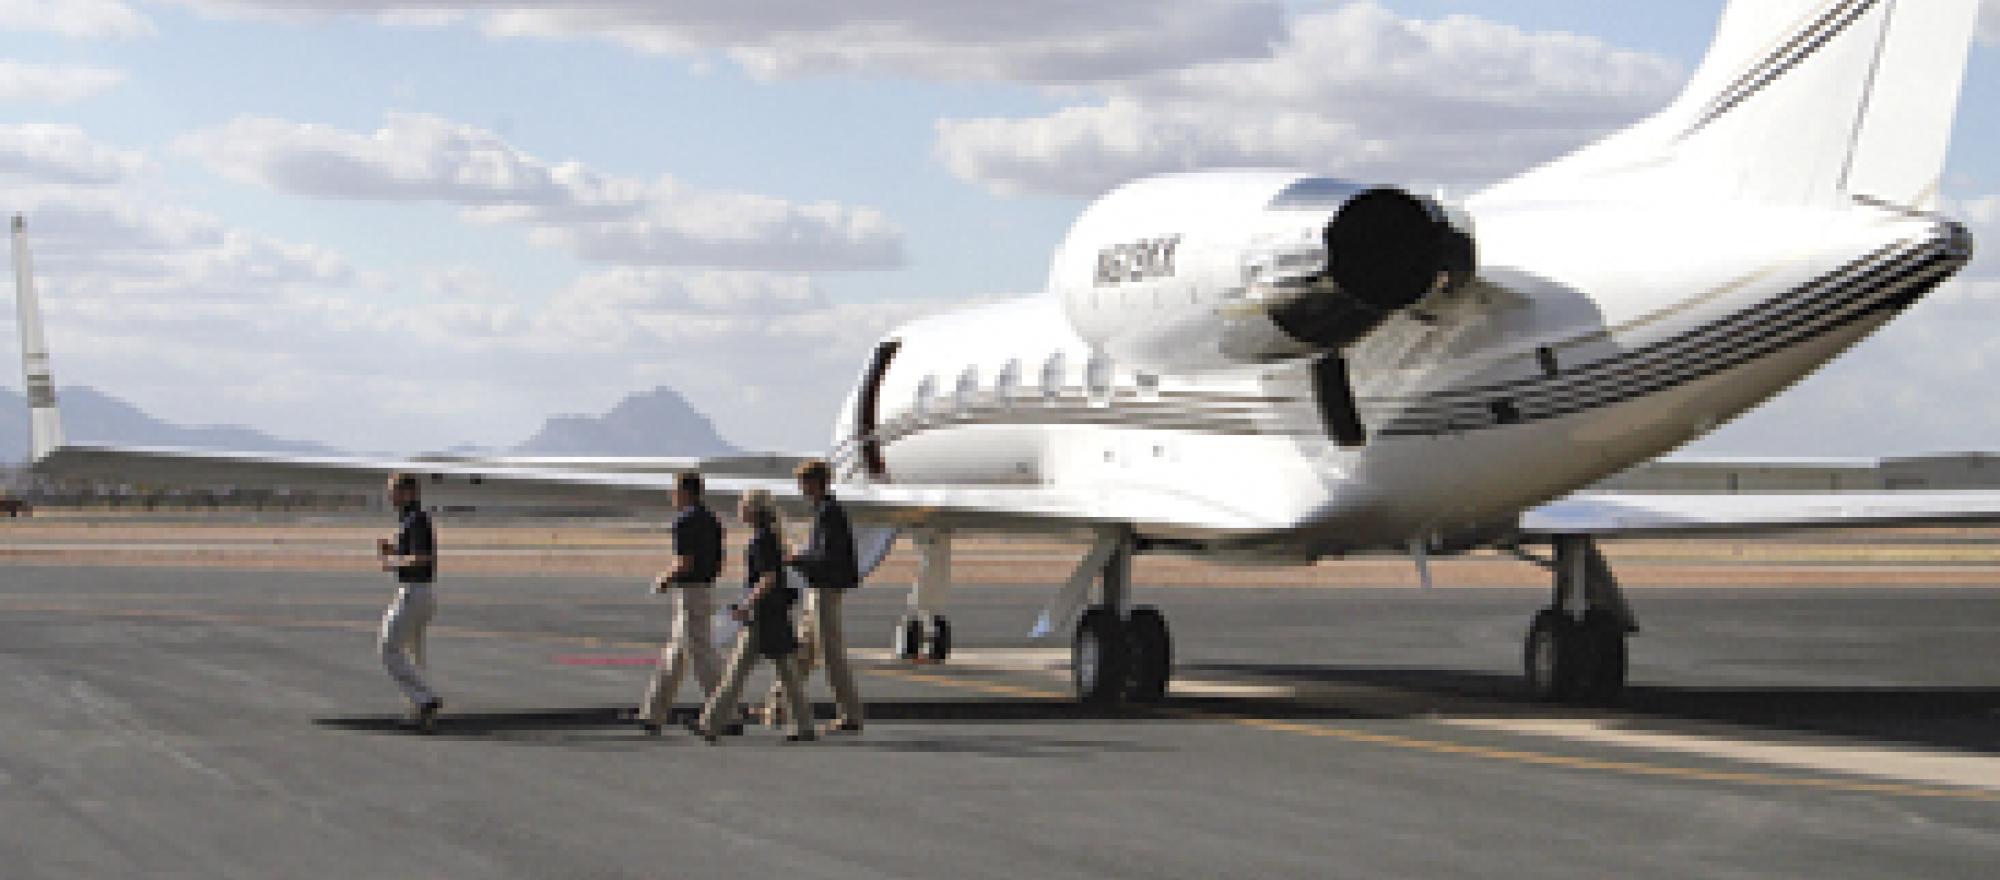 Tucson international airport boasts six FBOs. A seventh is slated to open thi